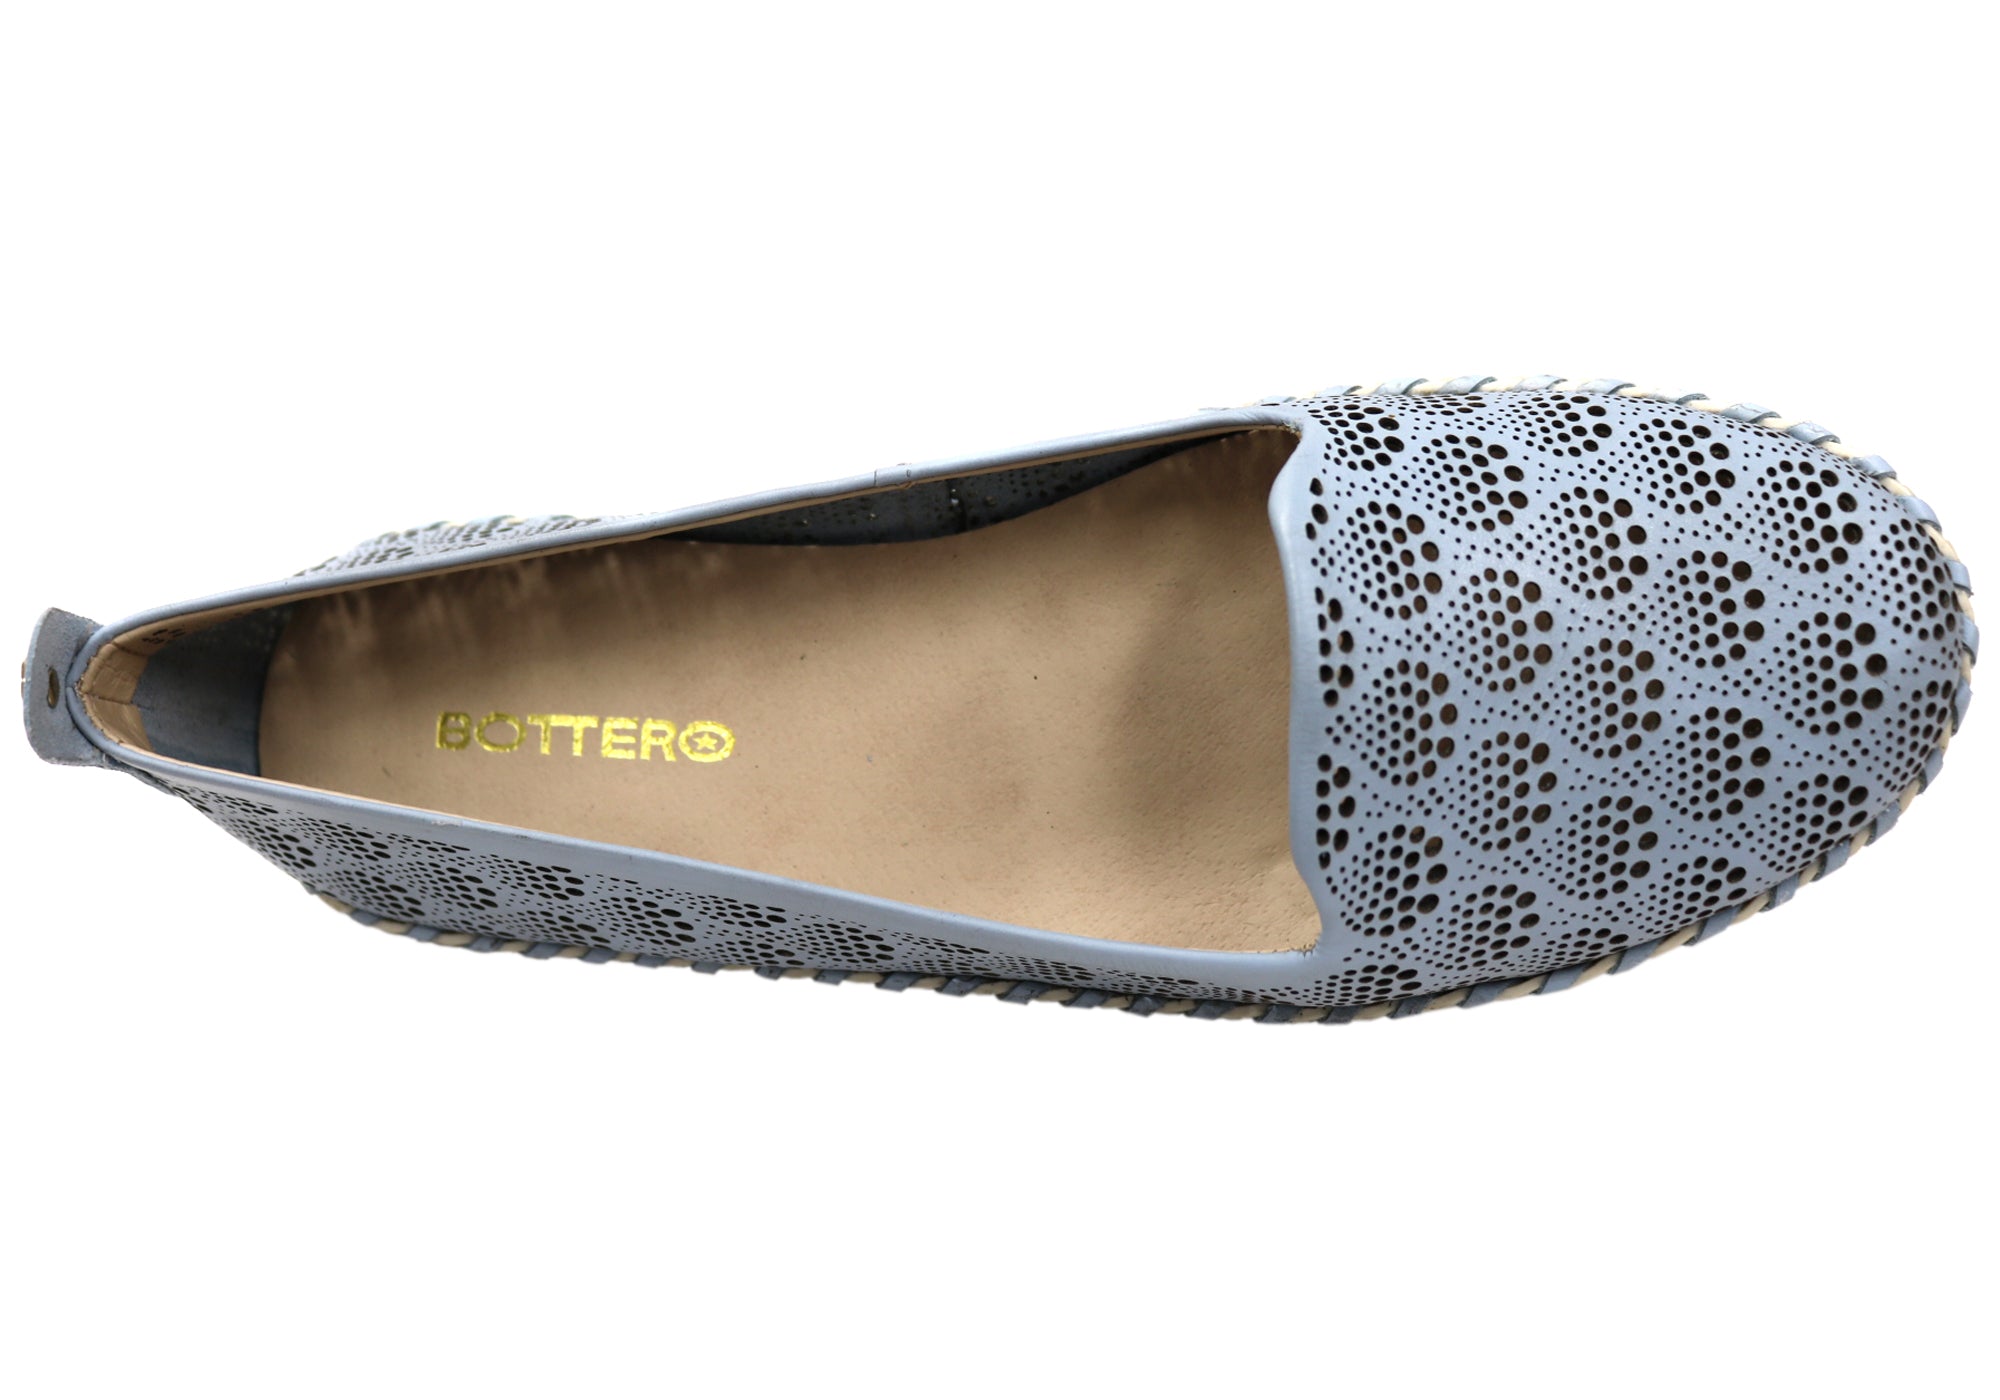 Bottero Jesabel Womens Comfortable Leather Flats Shoes Made In Brazil